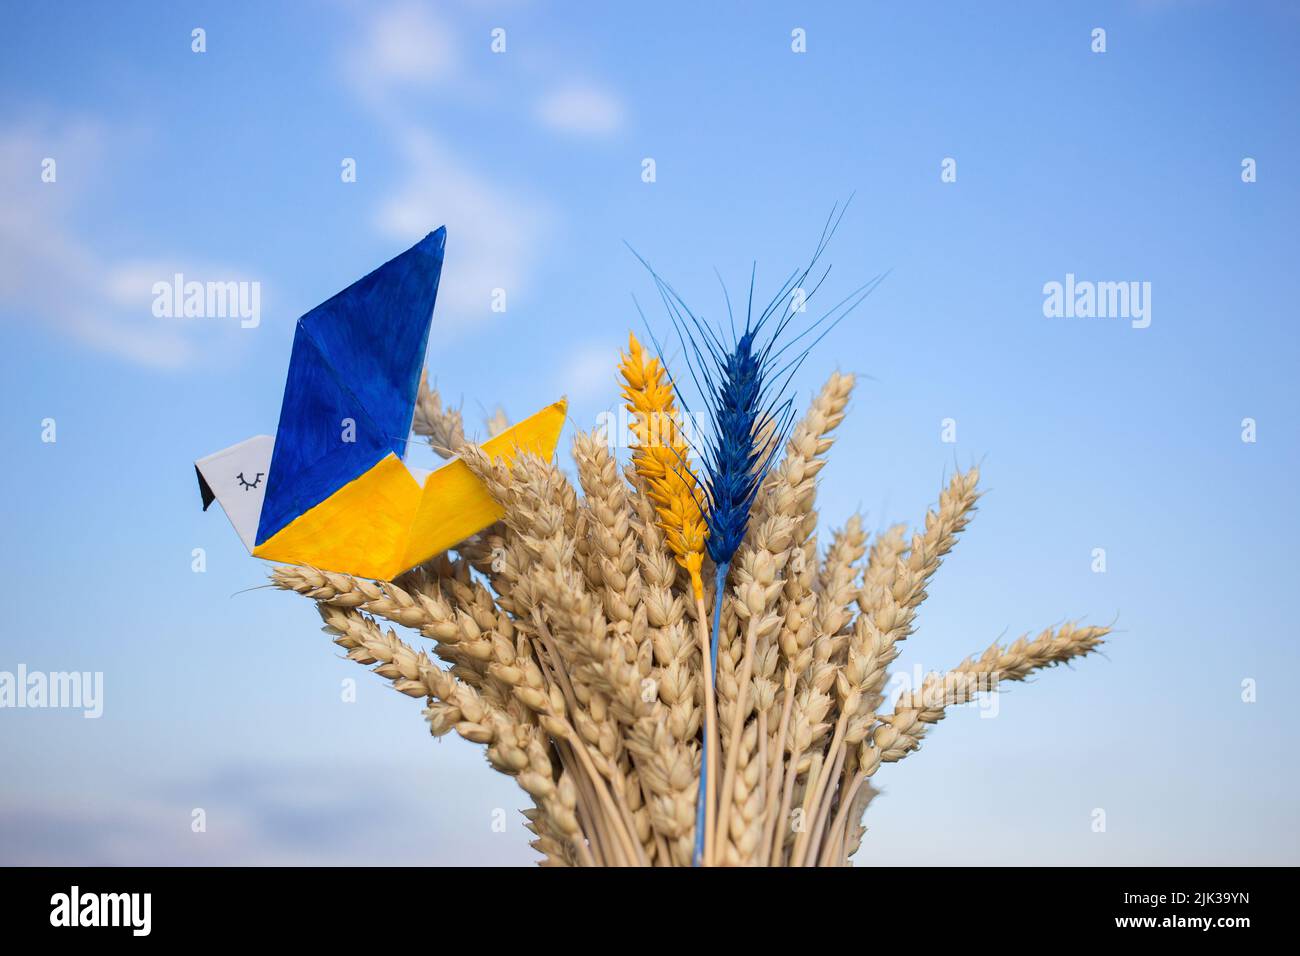 paper dove of peace, whose wings are painted in yellow-blue colors of Ukrainian flag, sits on bouquet of dry ripe spikelets of wheat against sky. Supp Stock Photo